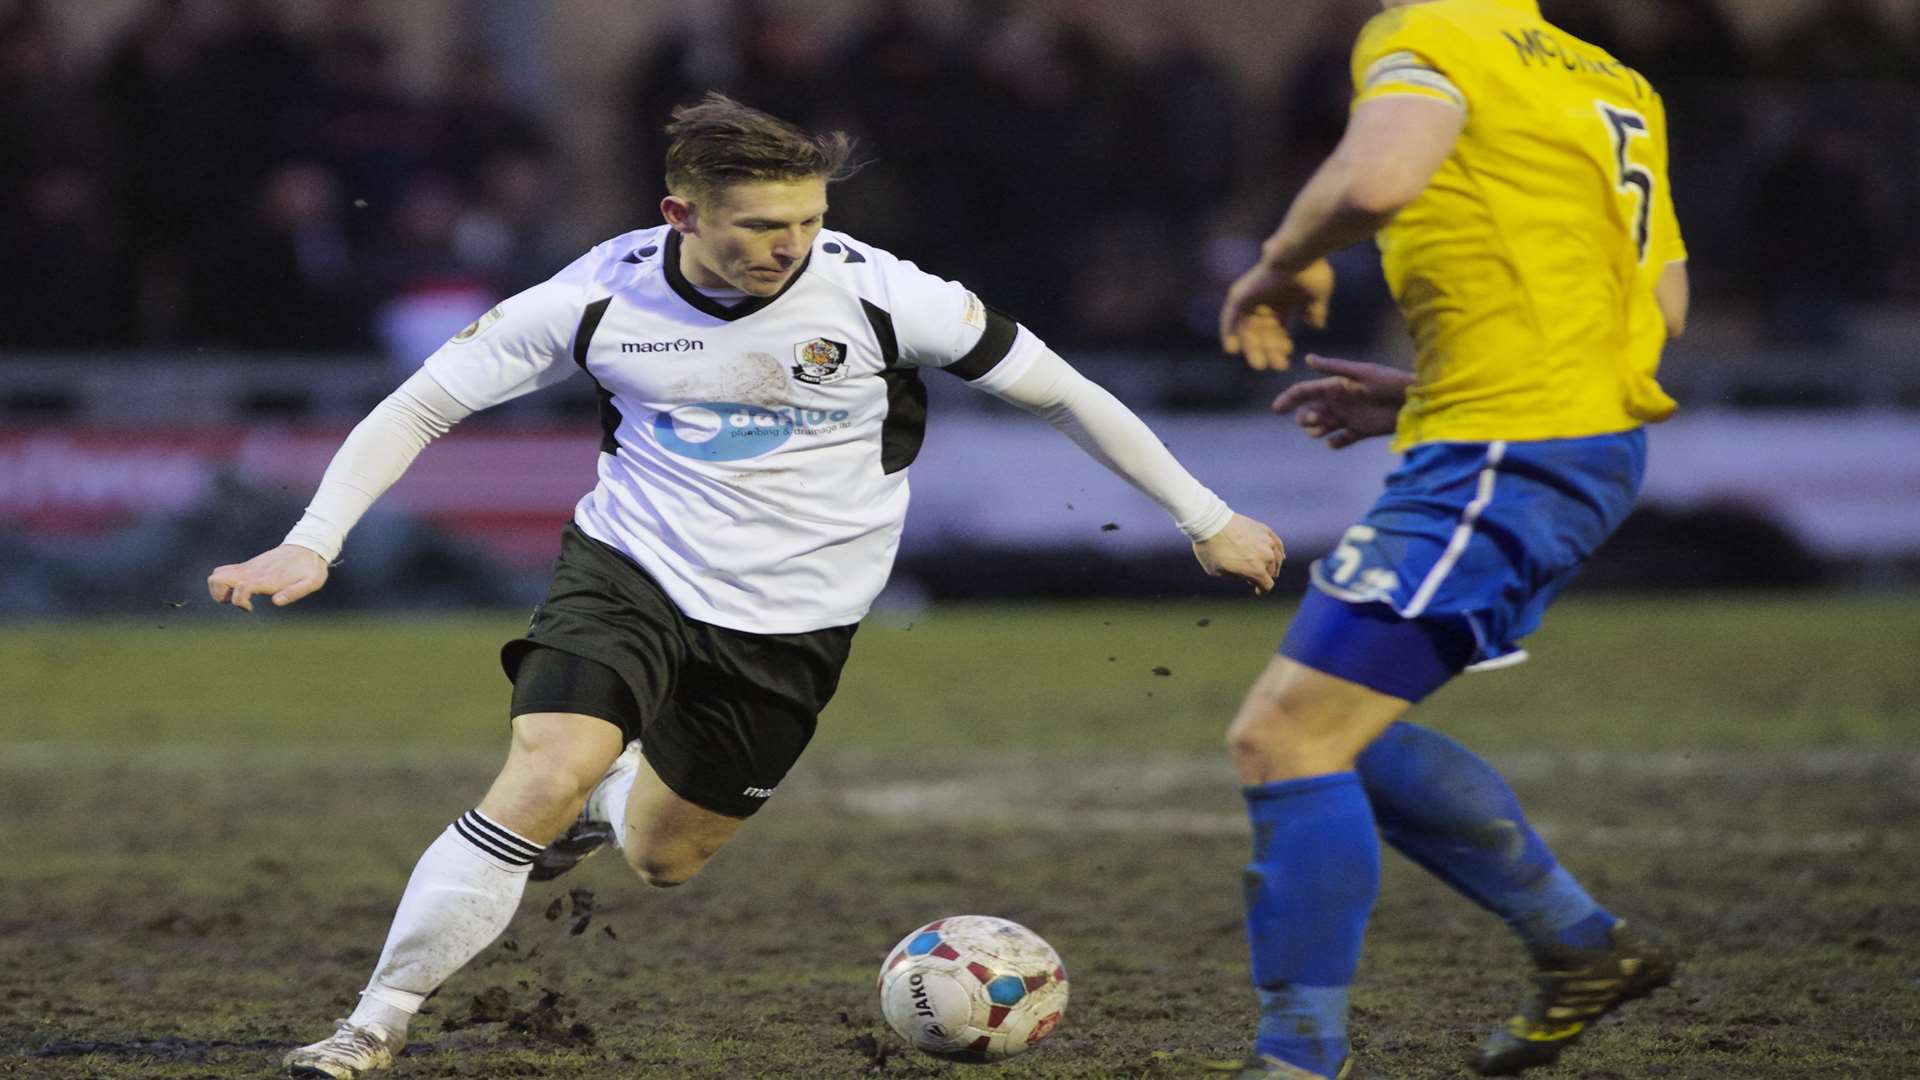 Andy Pugh on the ball for Dartford against Bristol Rovers Picture: Andy Payton